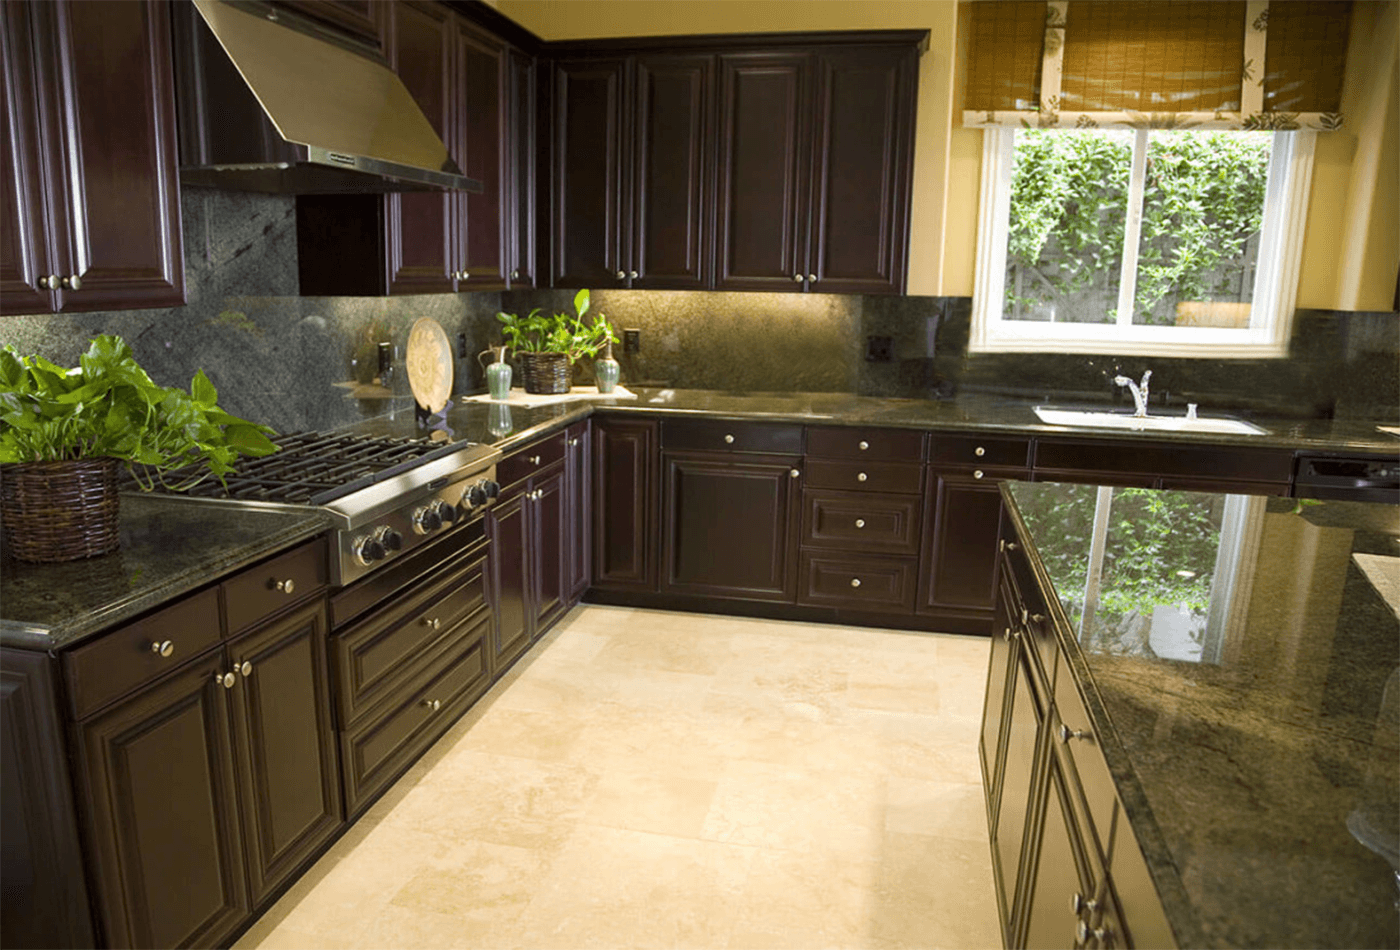 Countertop For kitchen: Buy, Build & Installing Ideas